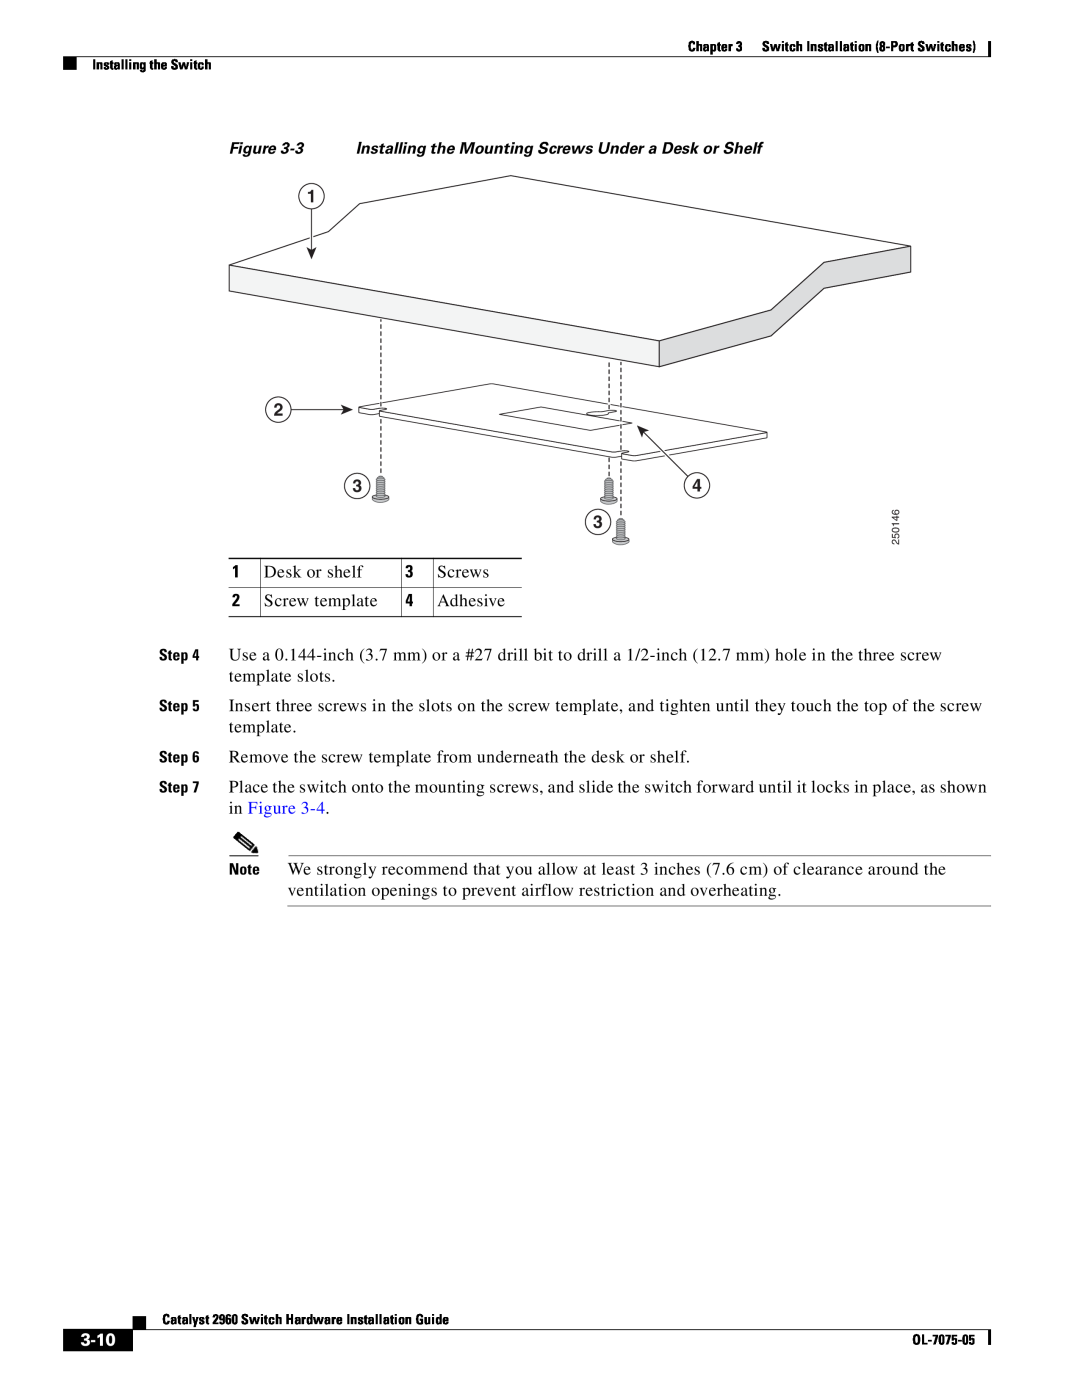 Cisco Systems 2960 specifications 3-10, 3 Installing the Mounting Screws Under a Desk or Shelf 